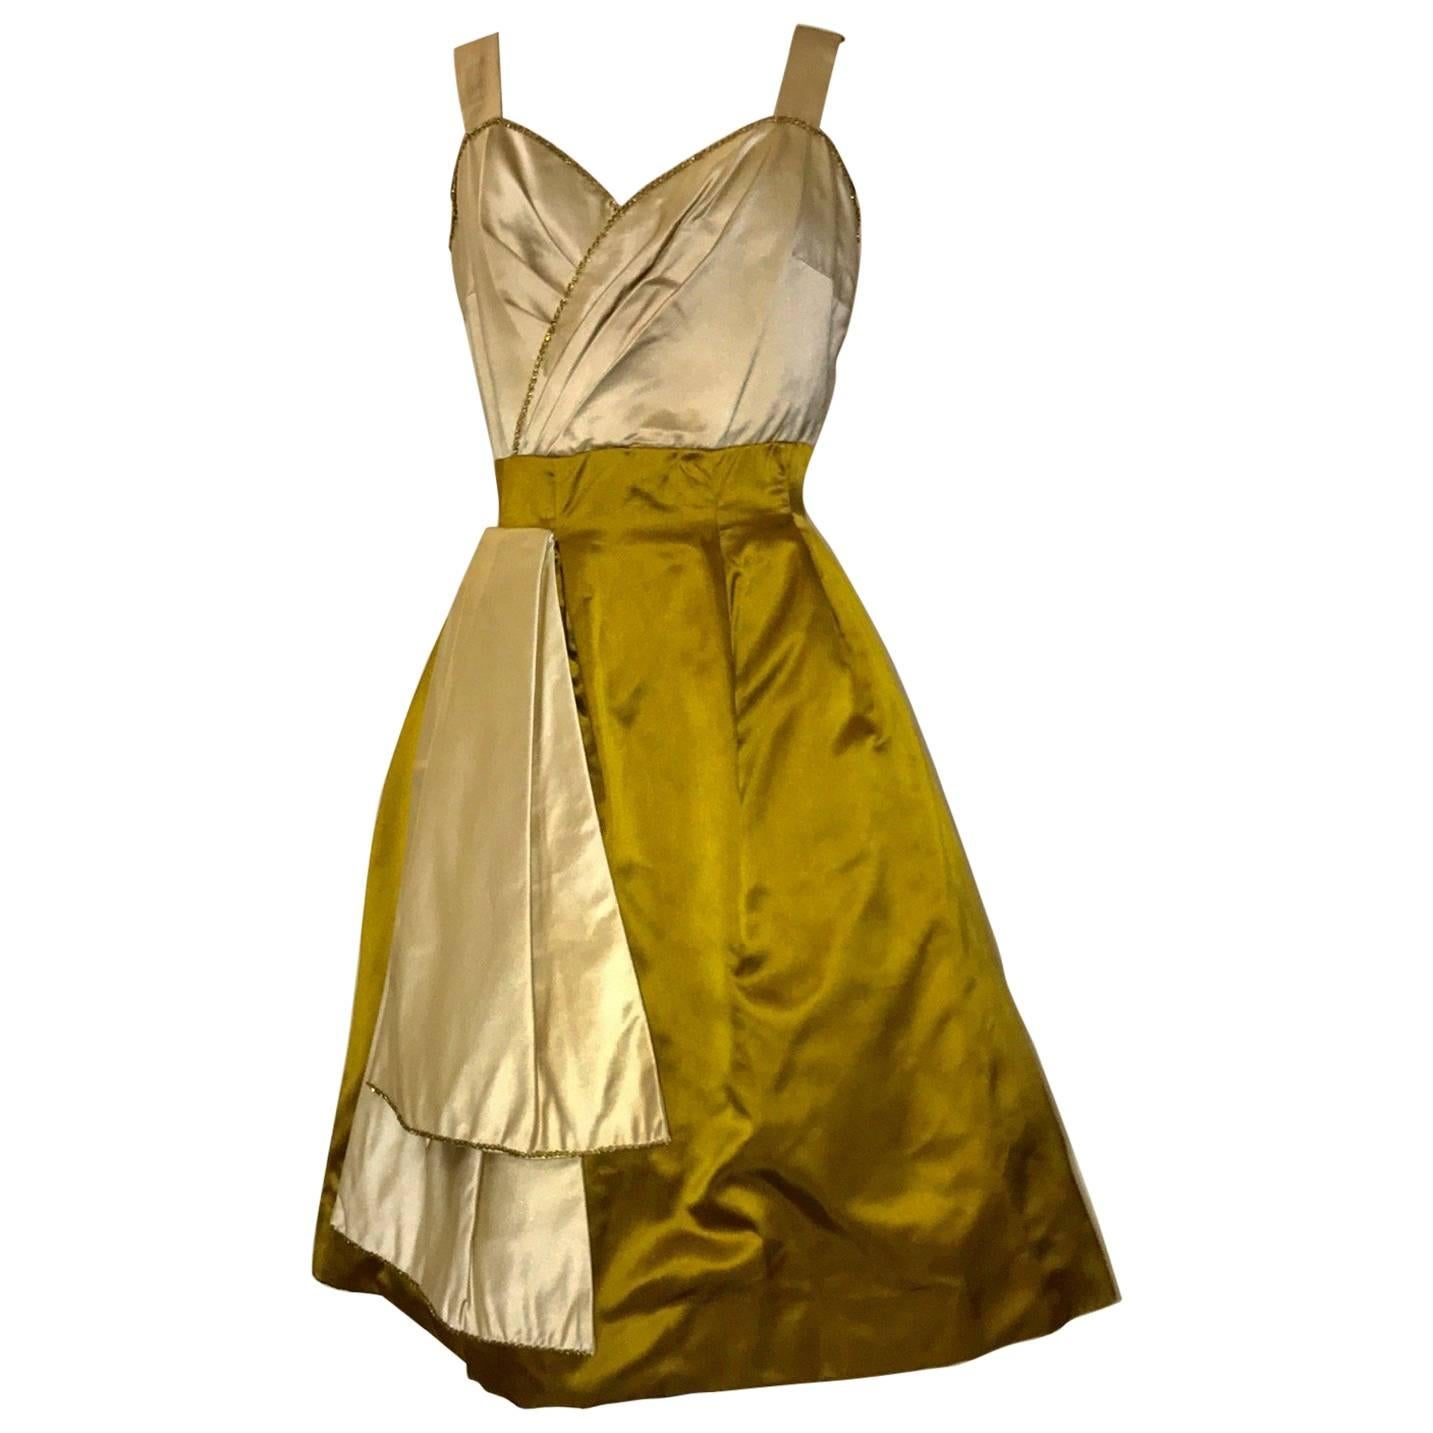 Jean Marchand for Friedlander Ivory Cream Yellow Gold Silk Cocktail Dress, 1950s For Sale